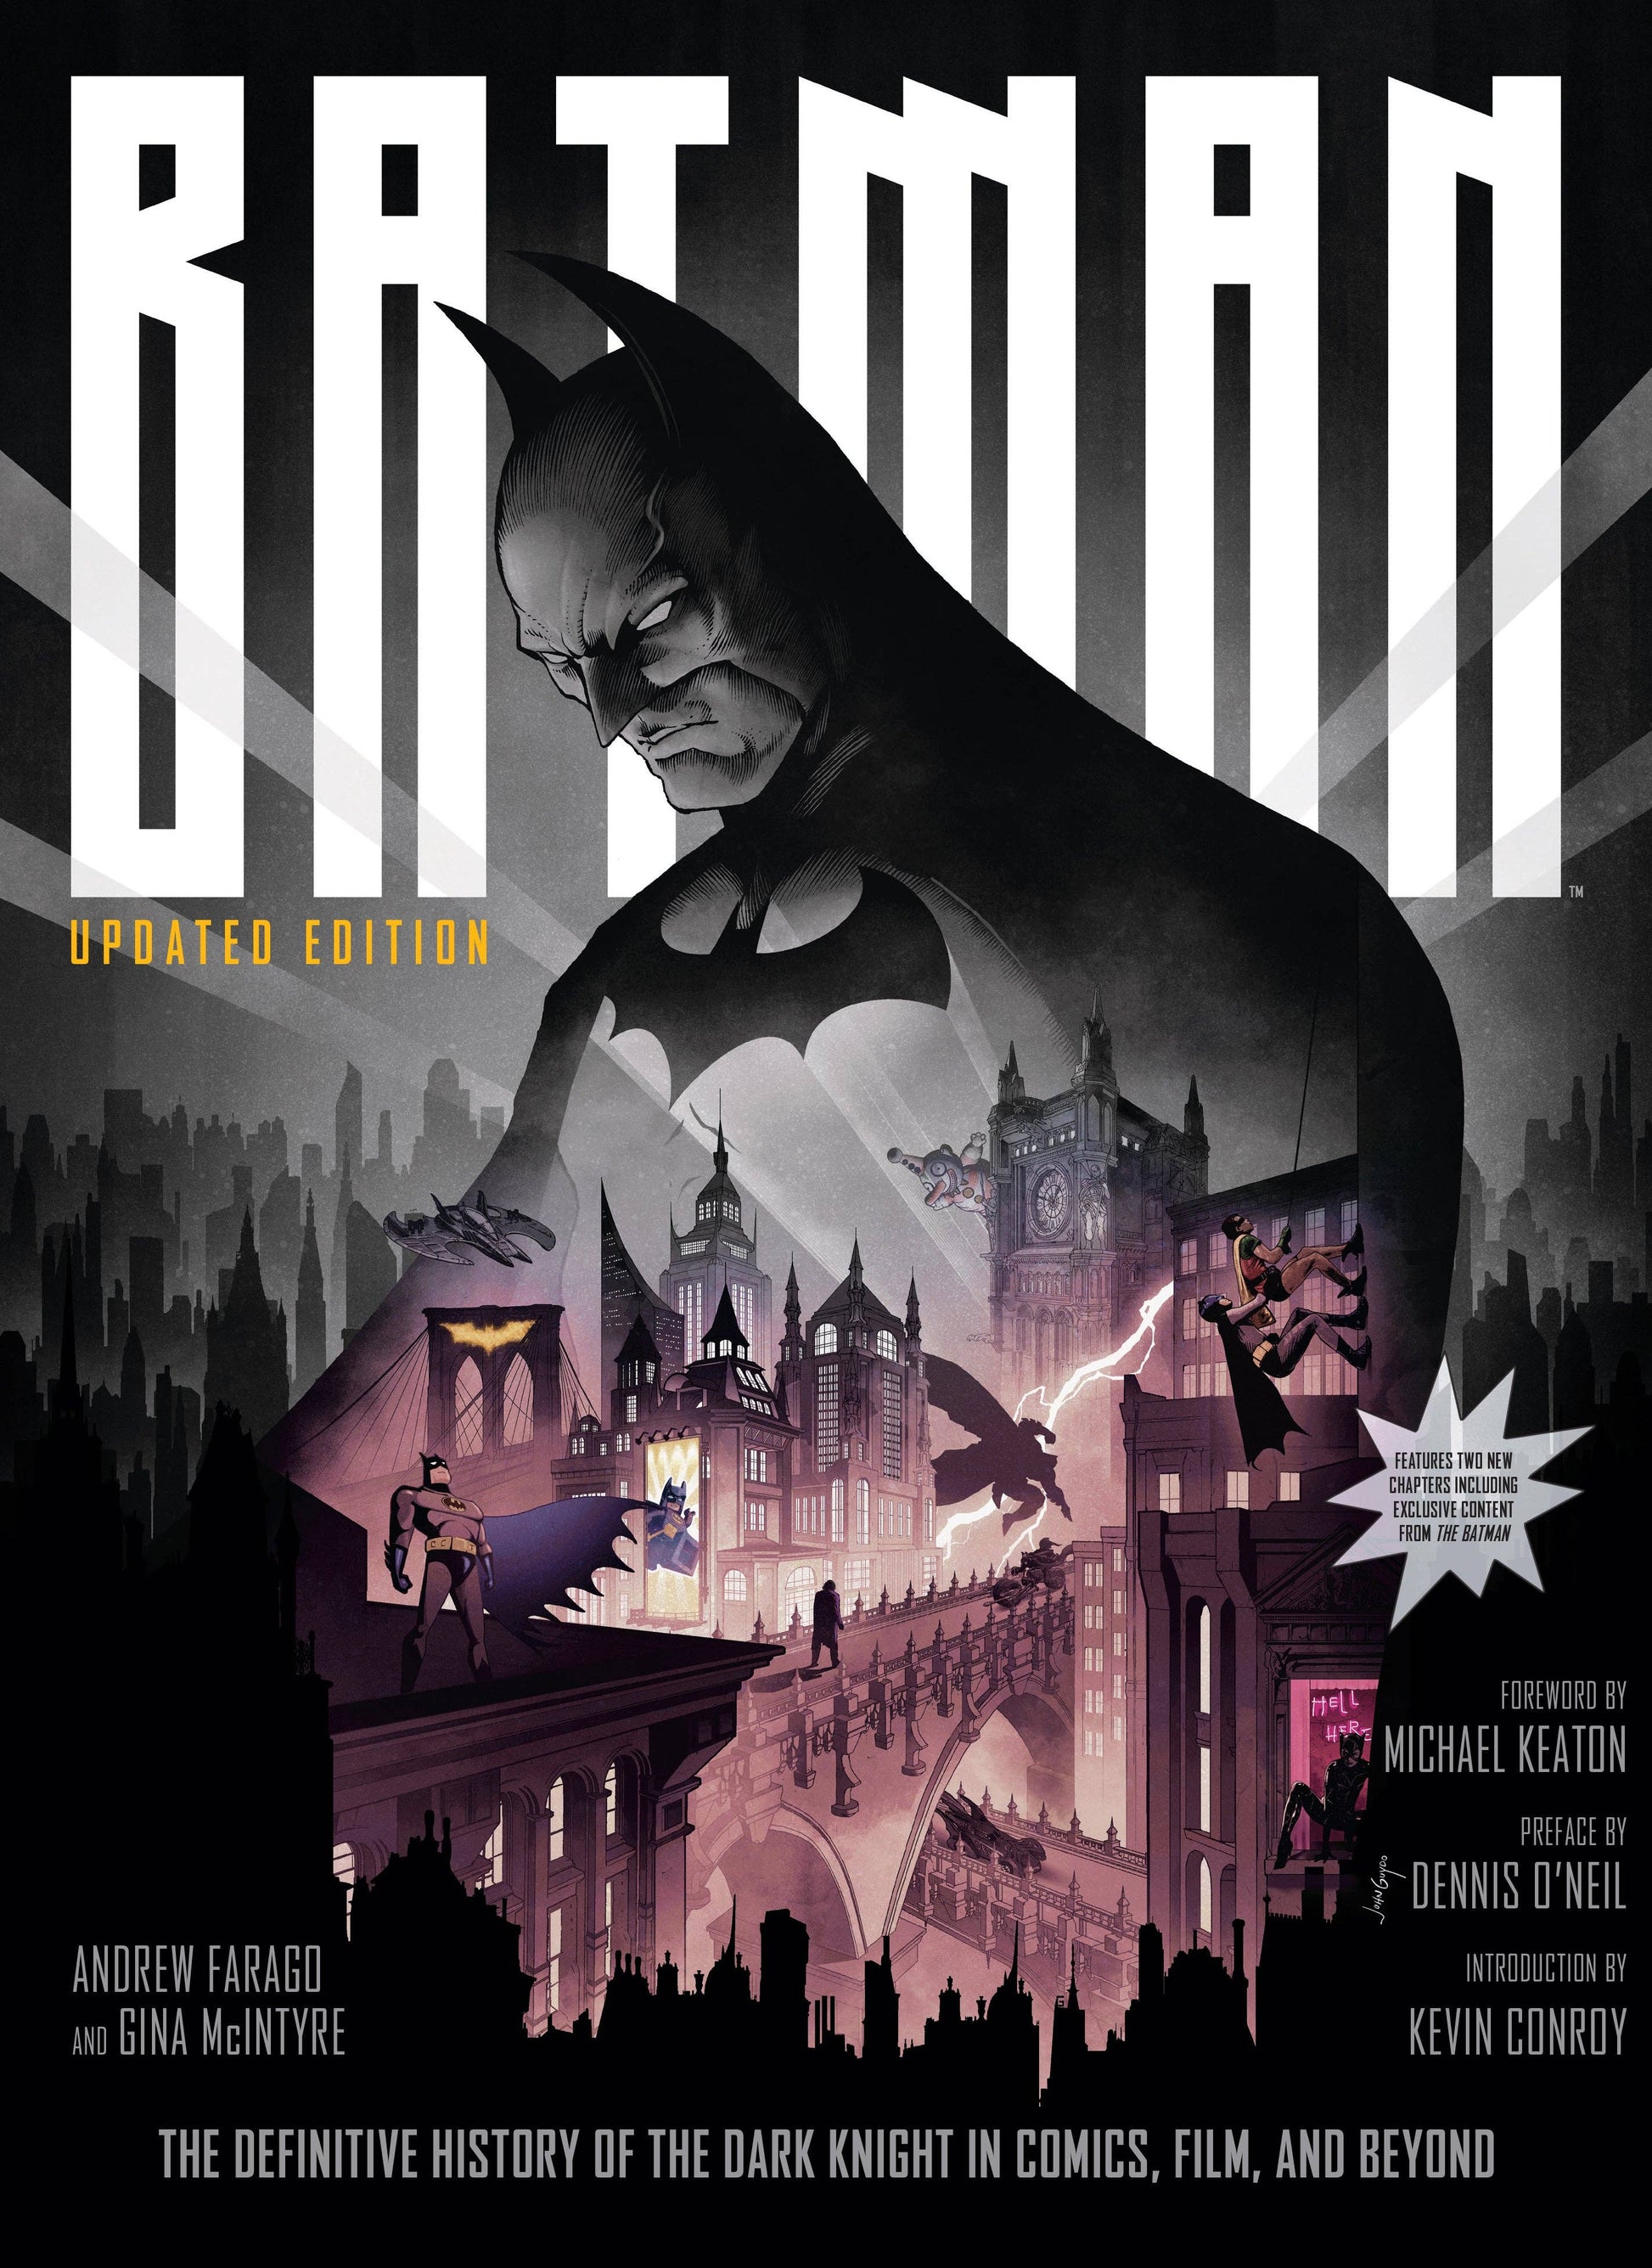 Batman: The Definitive History of the Dark Knight in Comics Film Beyond by Andrew Farago & Gina McIntyre